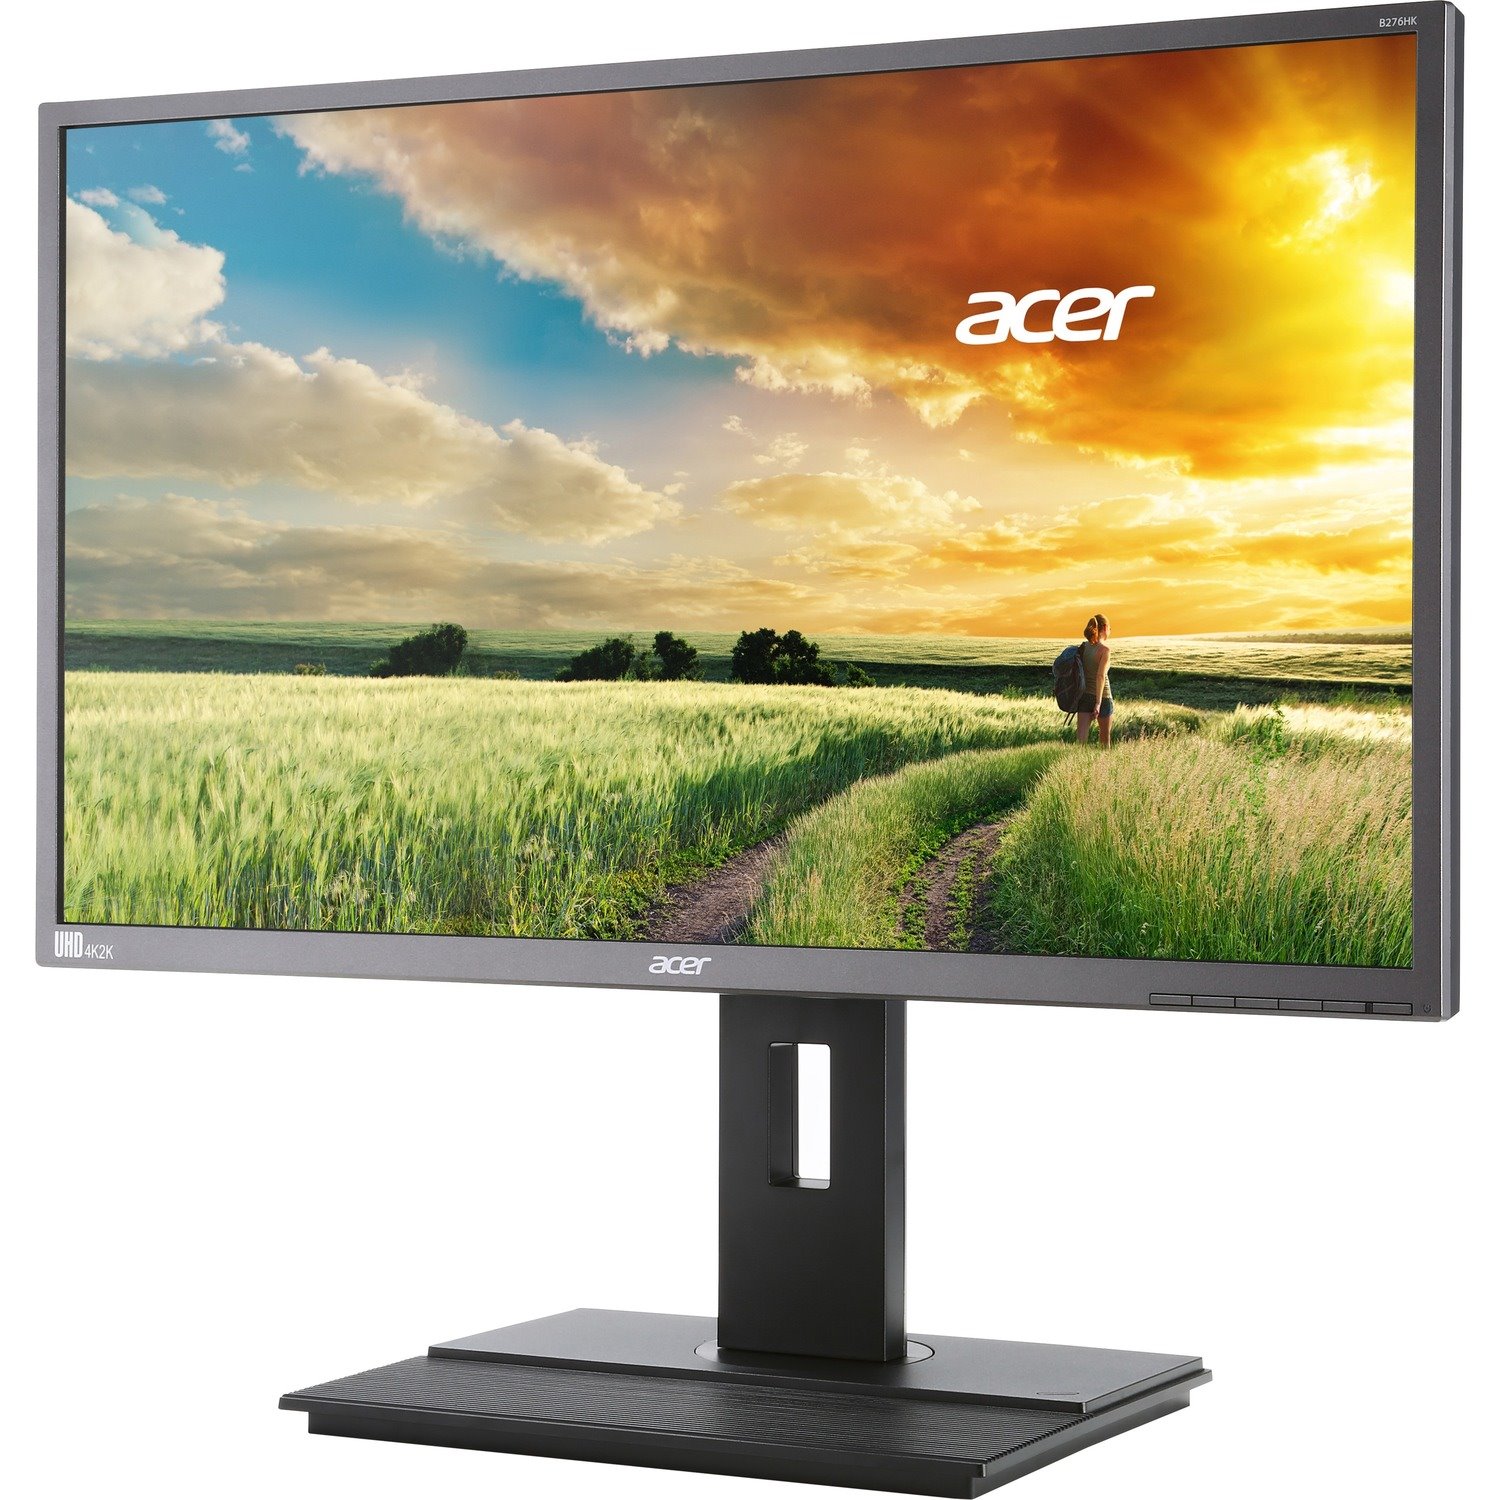 Acer B276HK 27" LED LCD Monitor - 16:9 - 6ms - Free 3 year Warranty